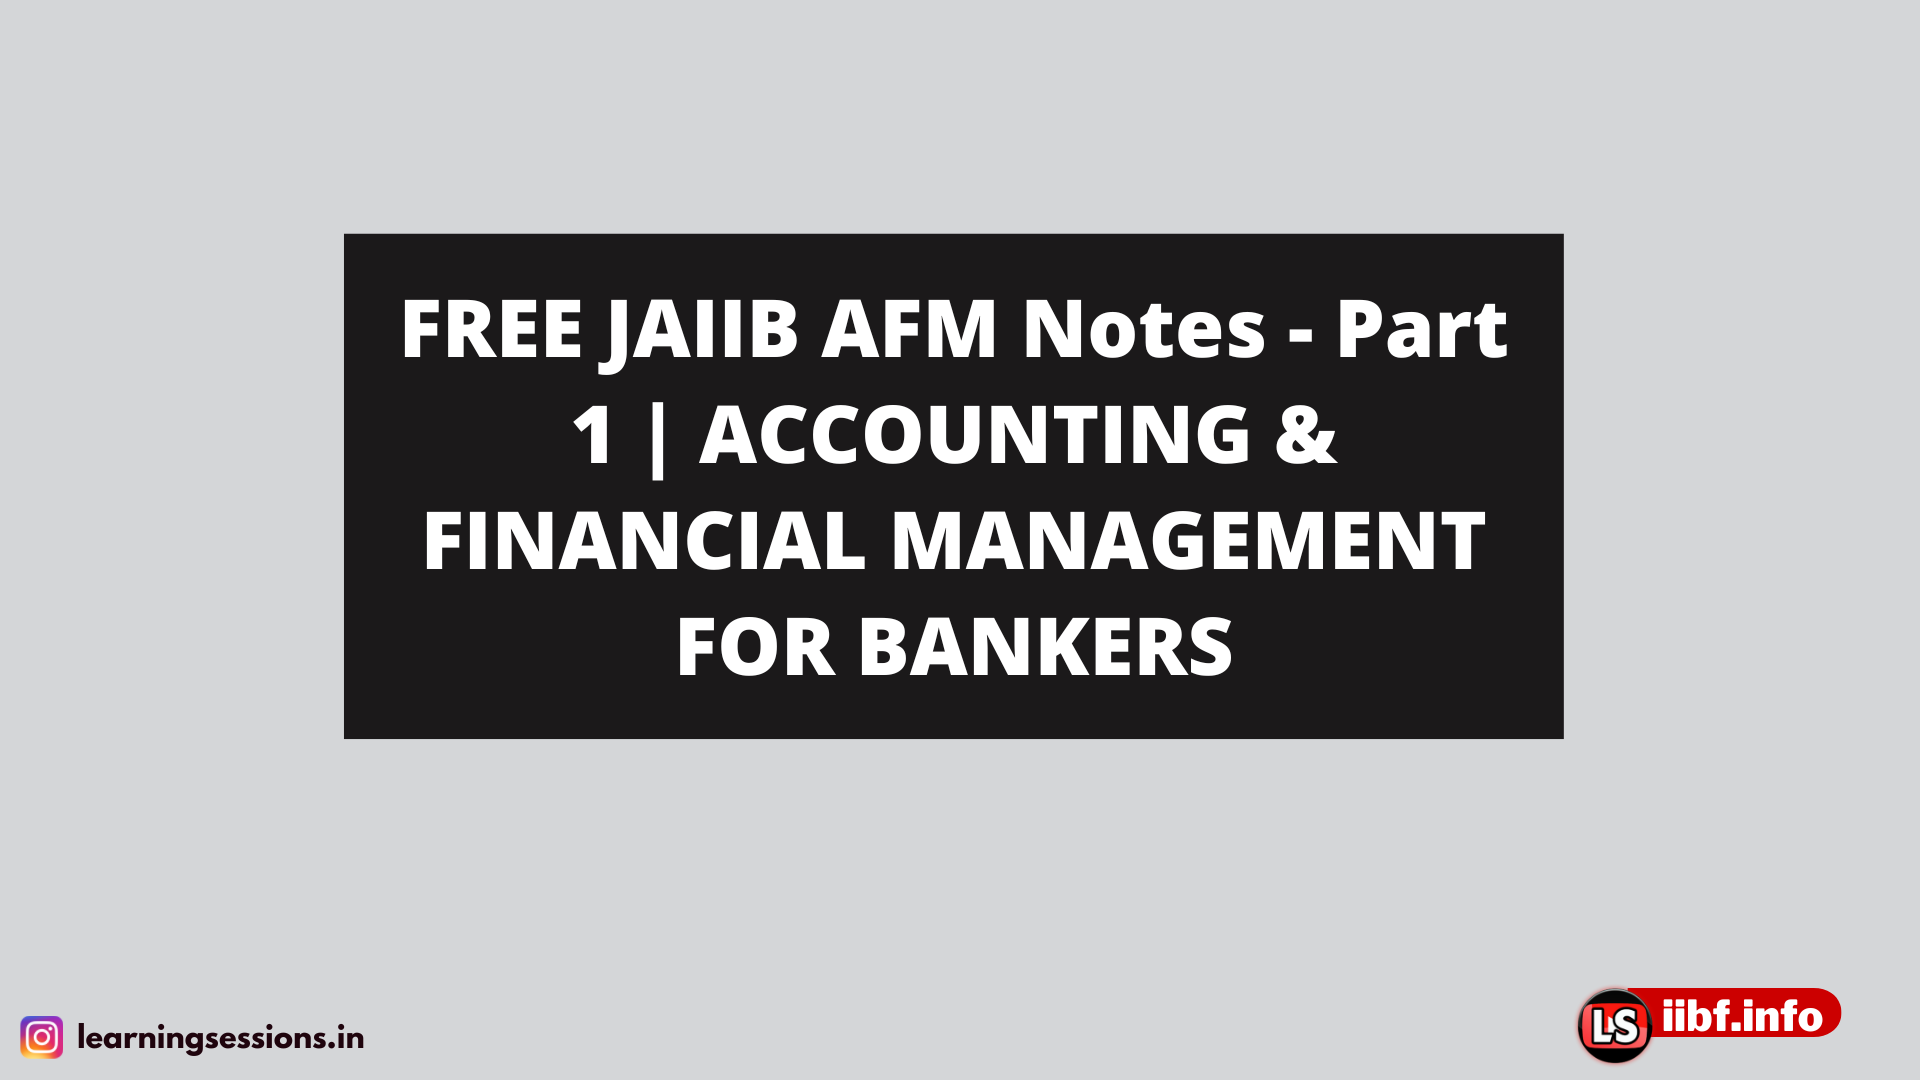 FREE JAIIB AFM Notes - Part 1 | ACCOUNTING & FINANCIAL MANAGEMENT FOR BANKERS